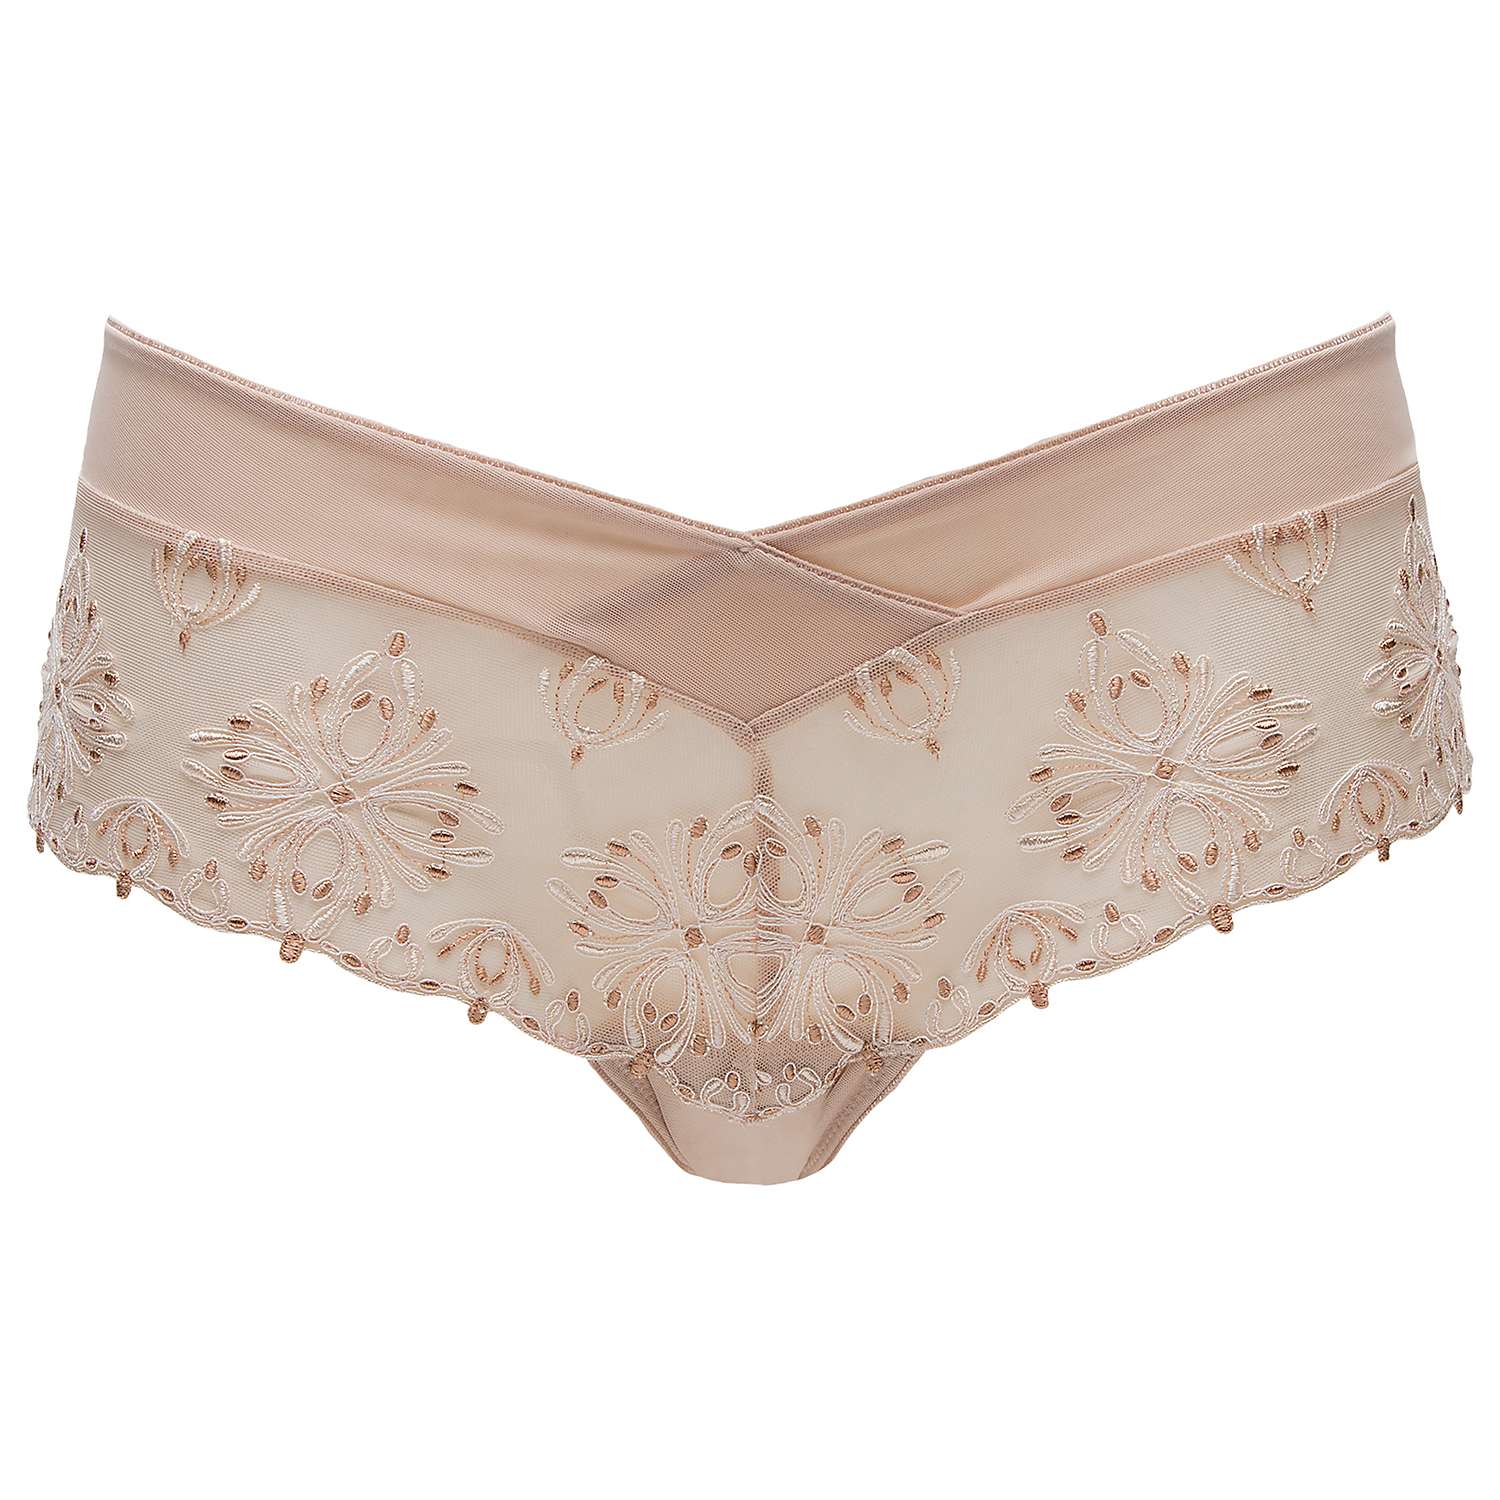 Buy Chantelle Champs Elysees Shorty Briefs Online at johnlewis.com